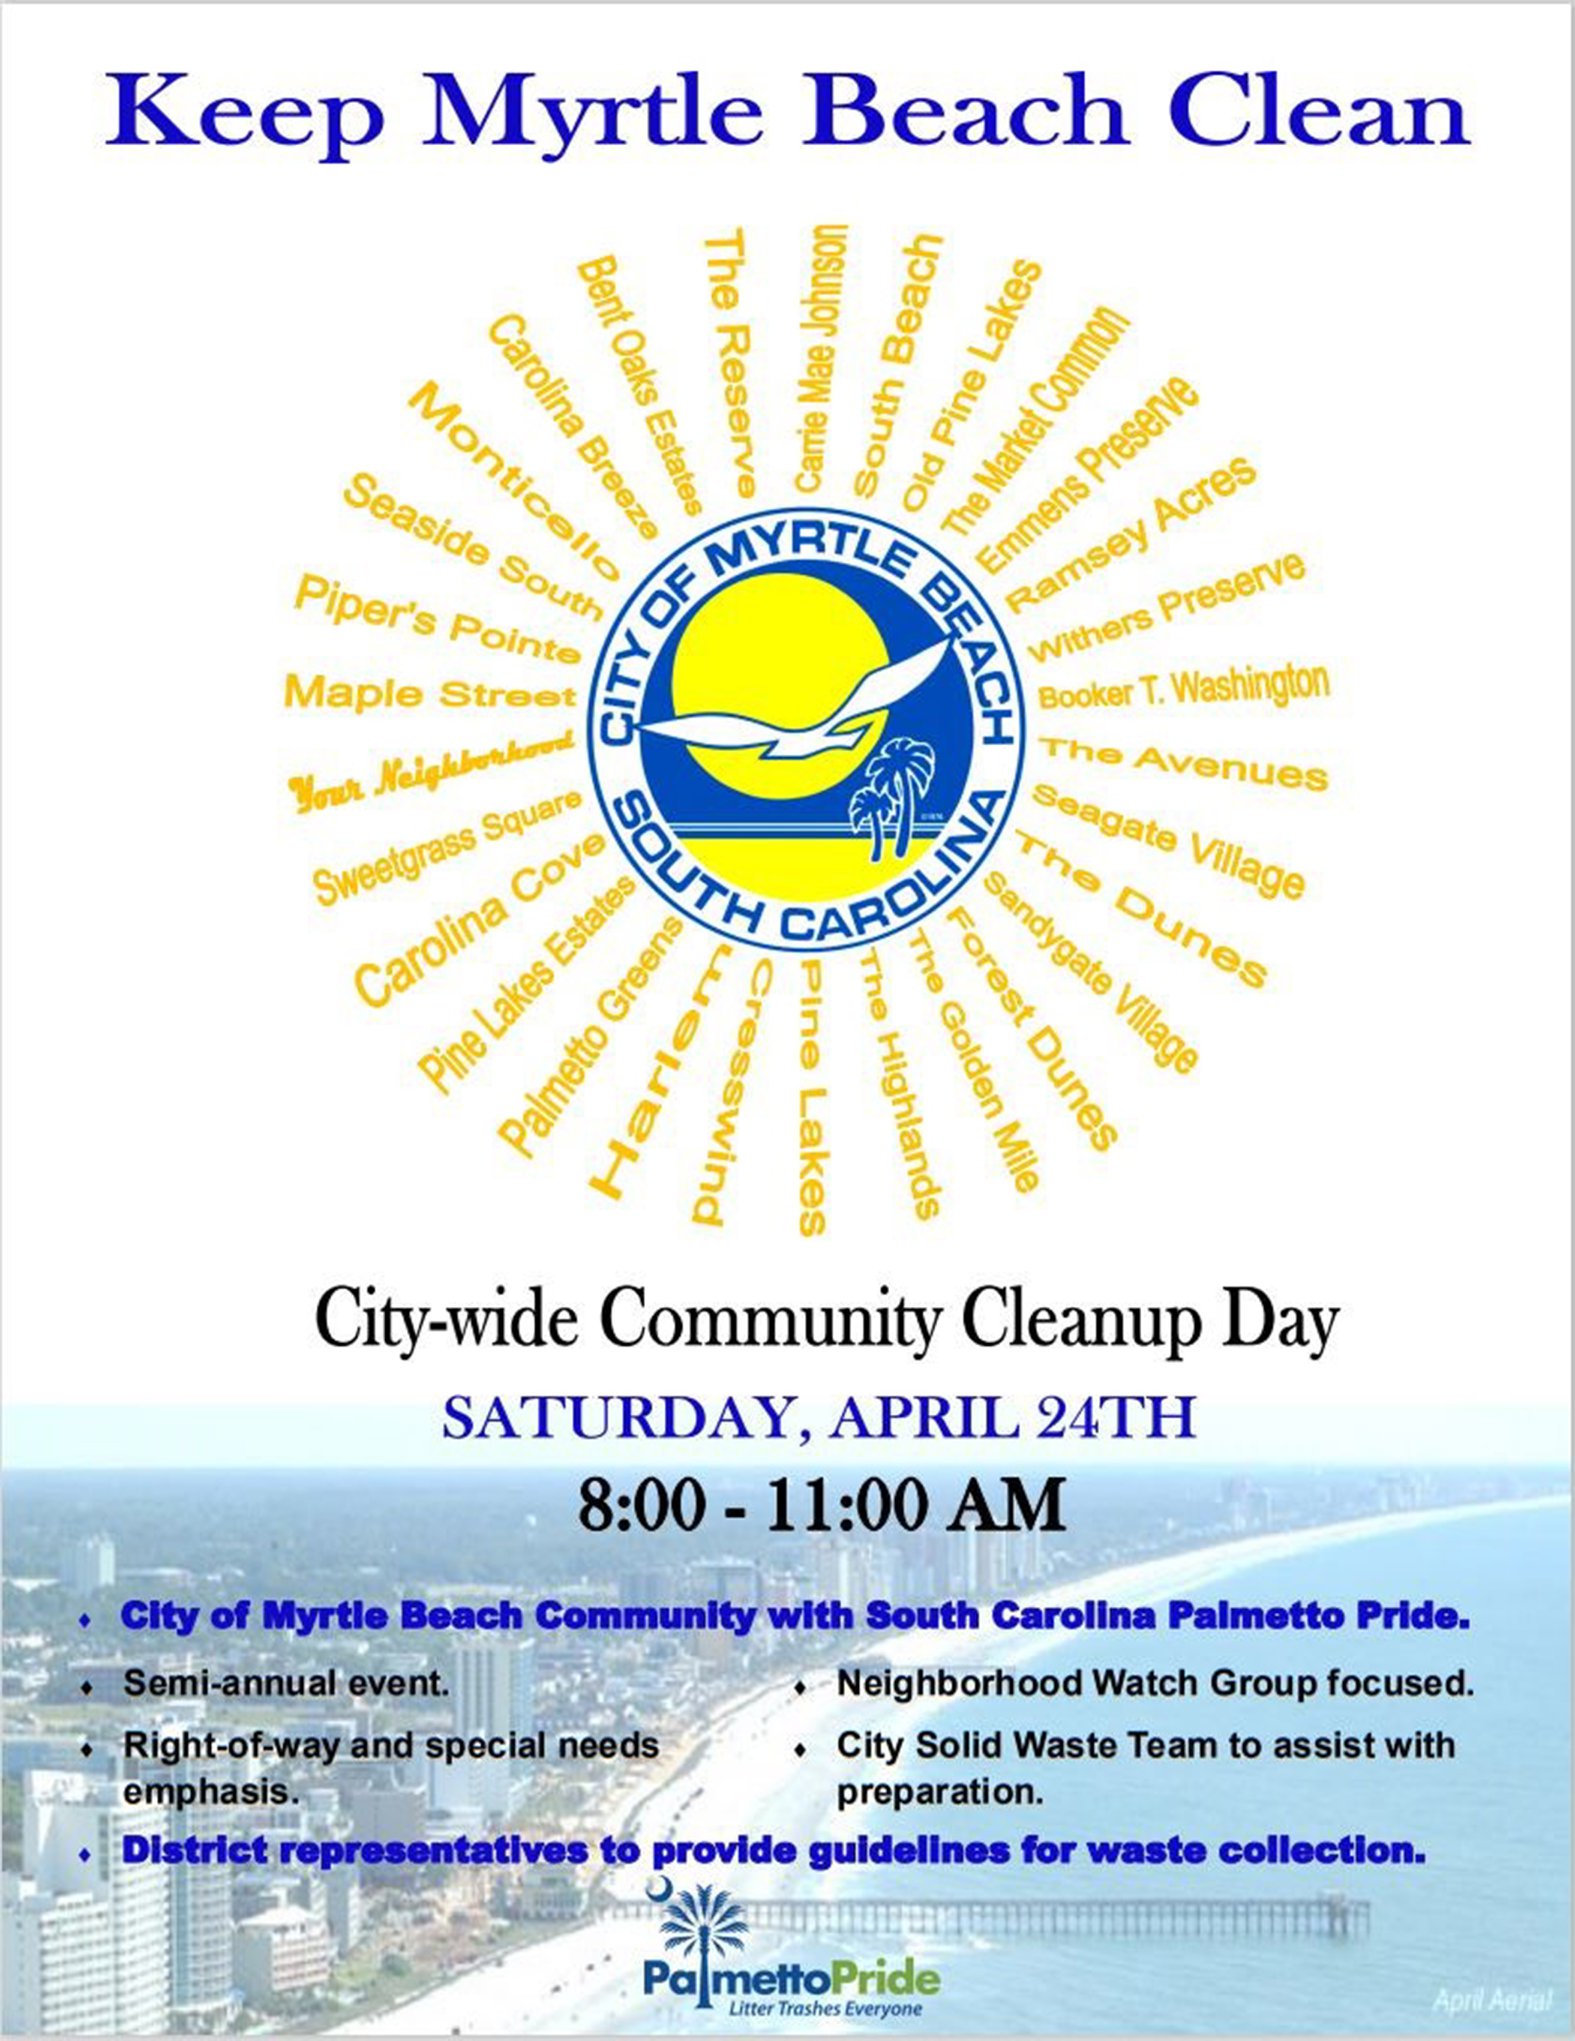 Community Clean Up 2021